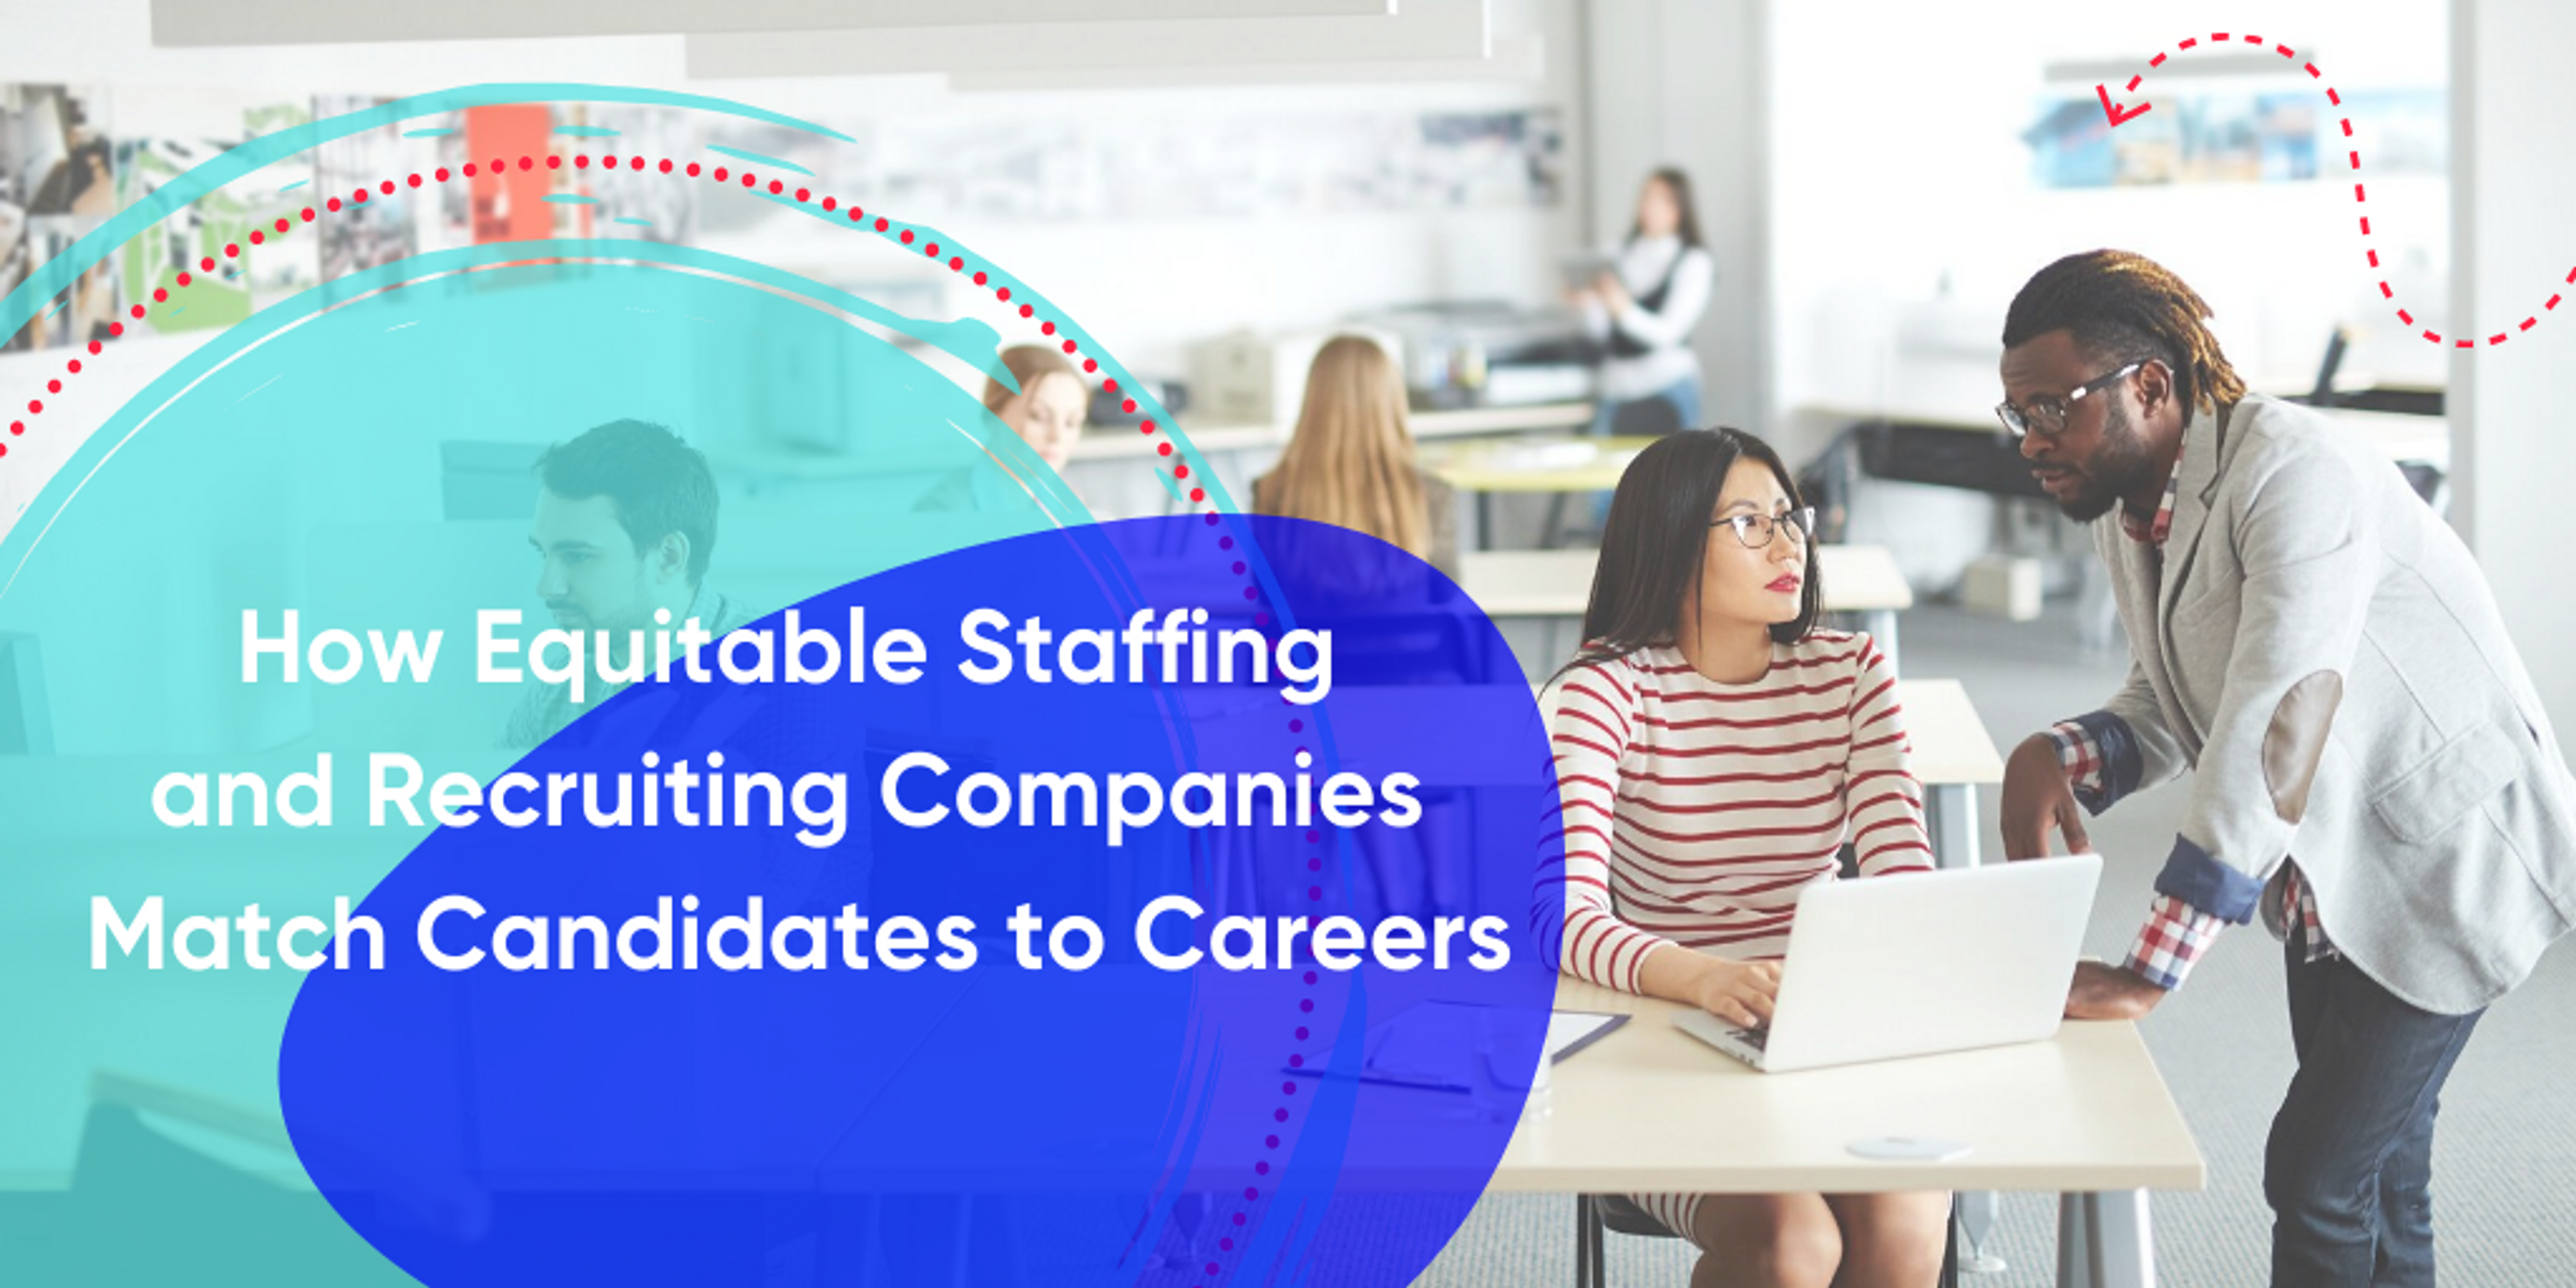 Image of an office with people assisting one another. Text: How Equitable Staffing and Recruiting Companies Match Candidates to Careers